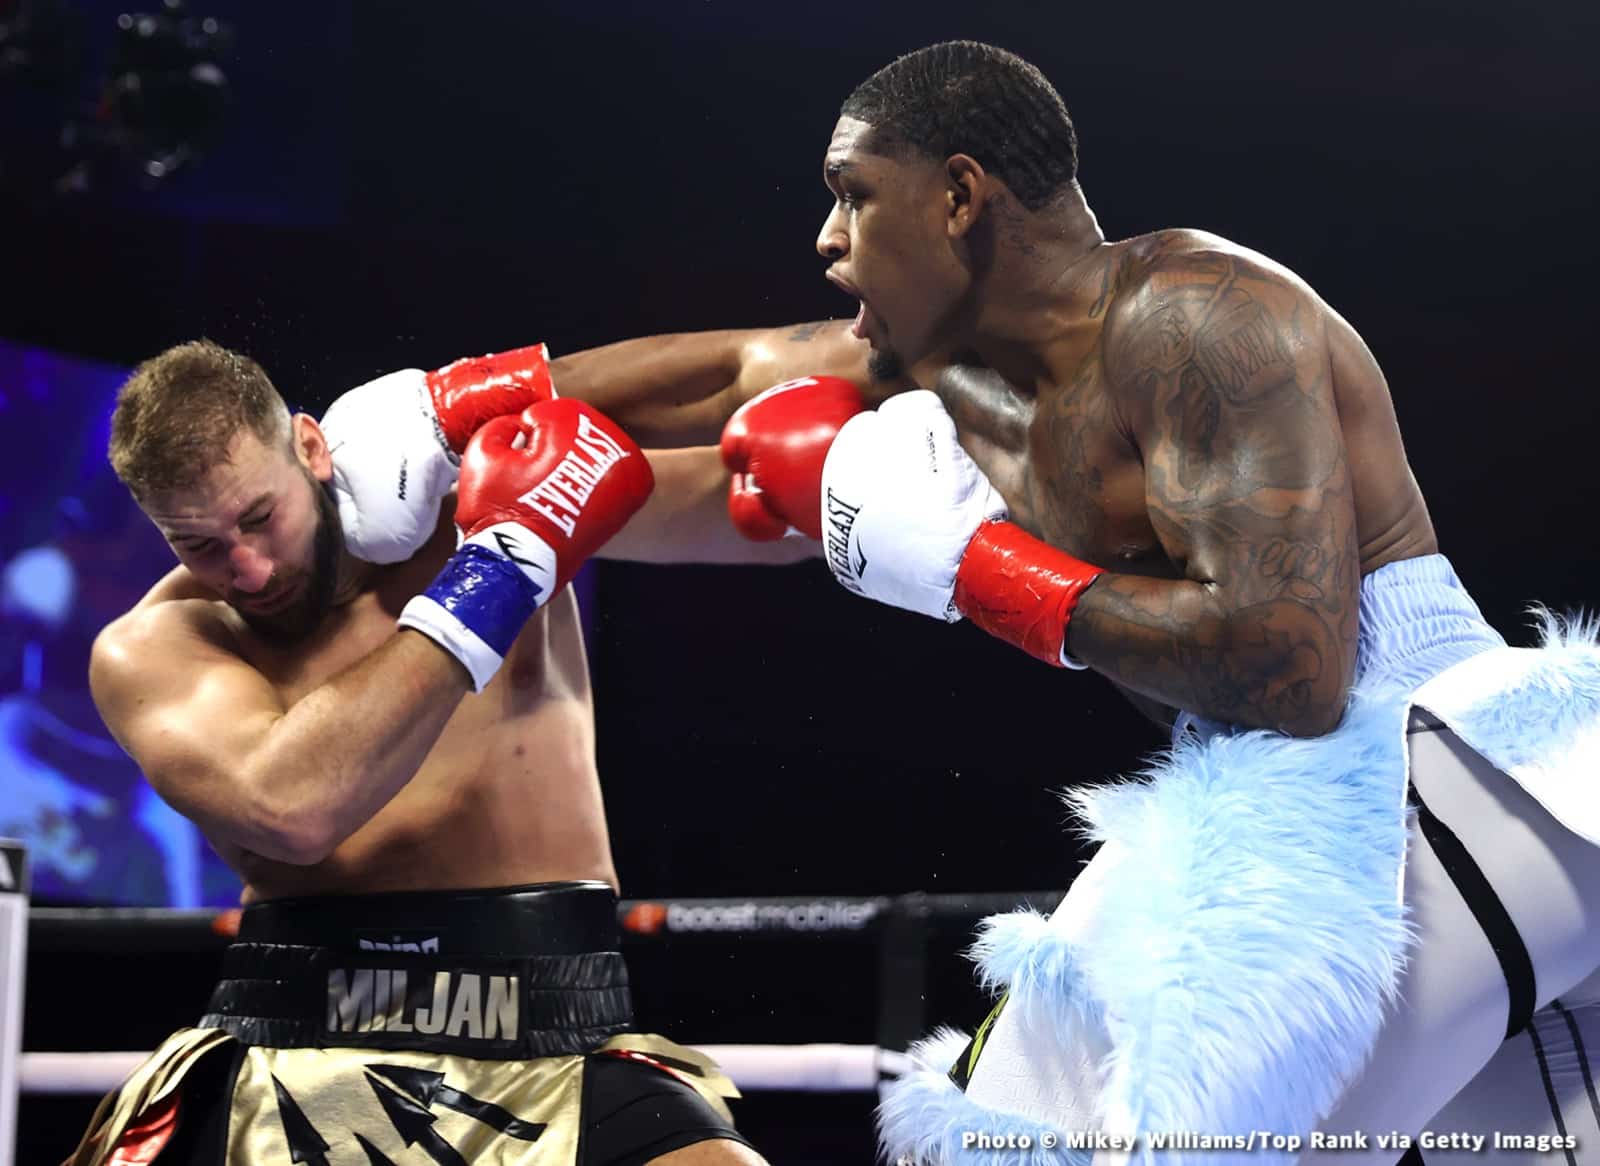 Image: Jared Anderson stops Miljan Rovcanin in 2nd round